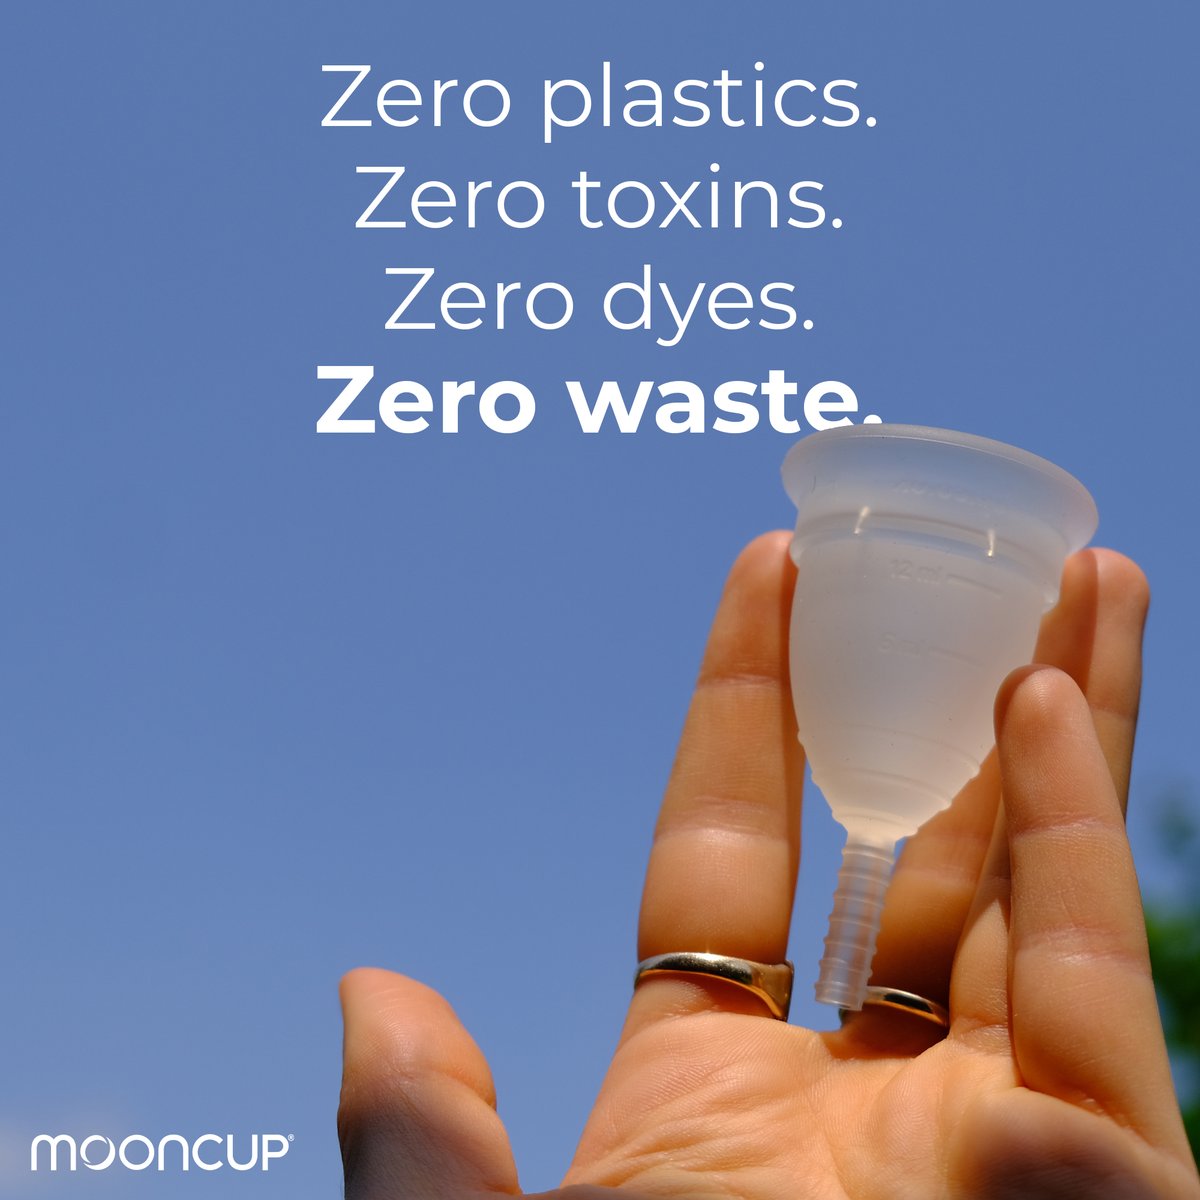 … zero worries!💙 Why did you switch to the #Mooncup®? #plasticfreeperiods #zerowaste